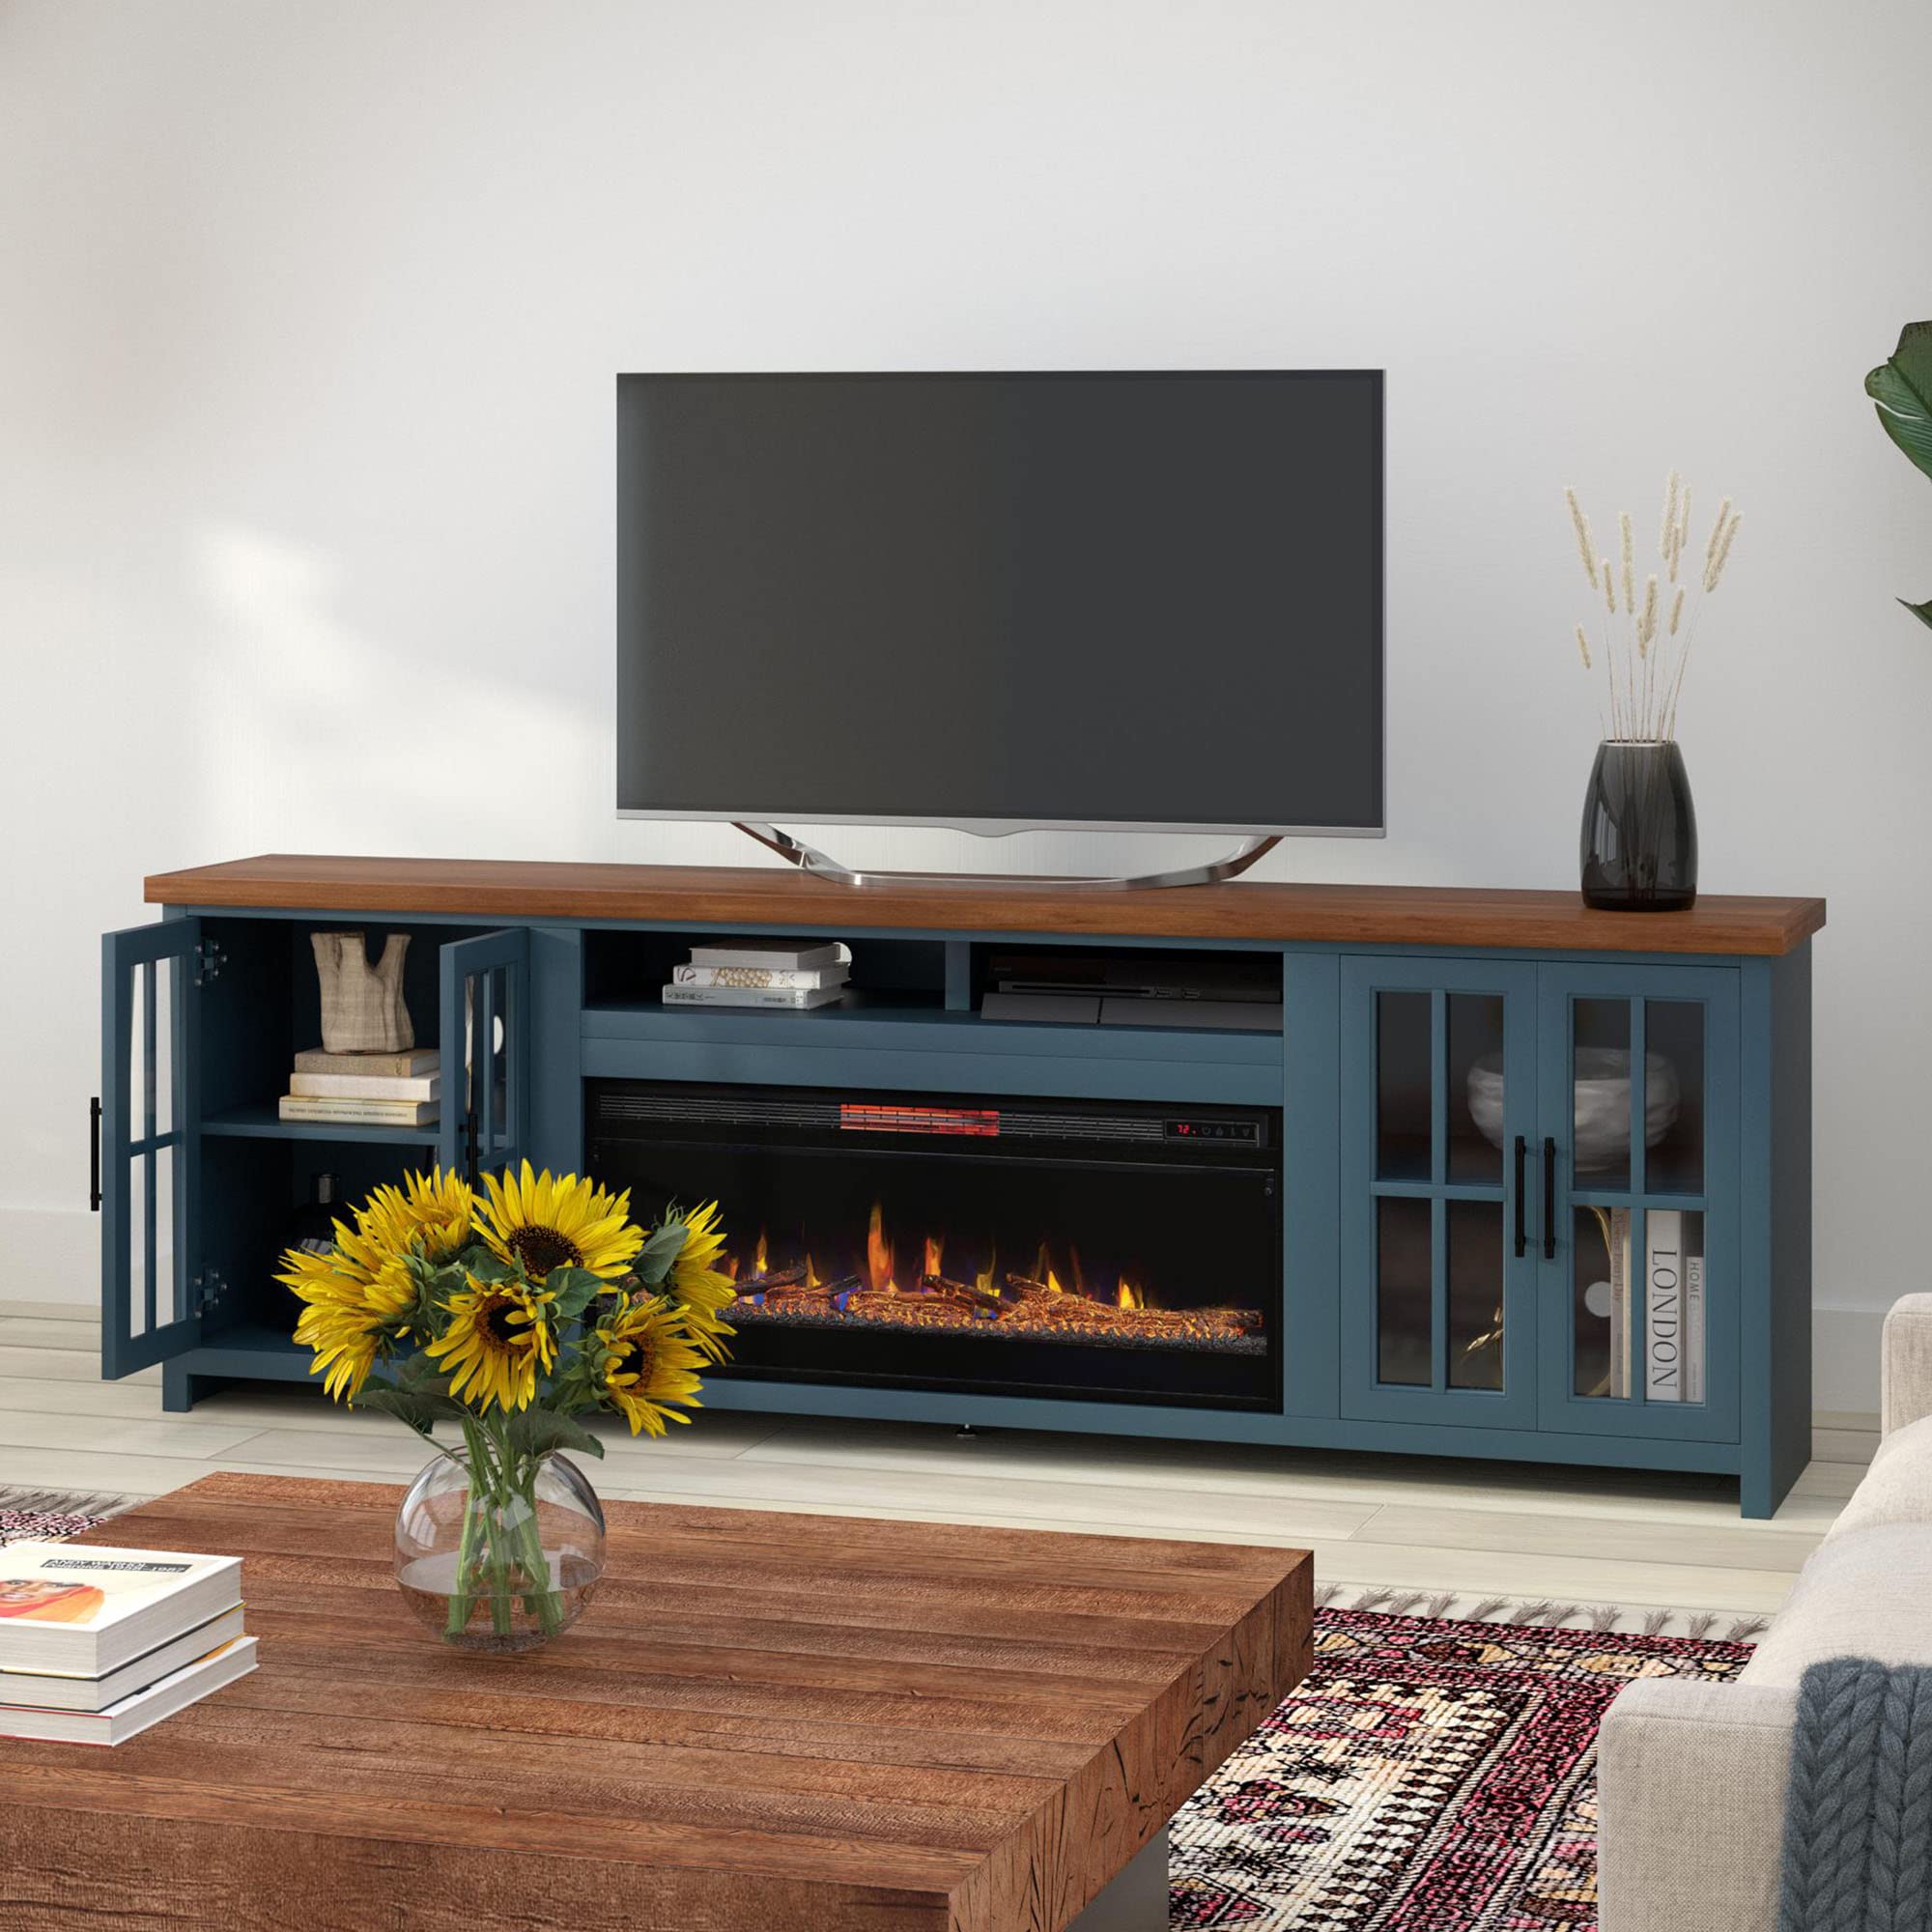 Bridgevine Home Nantucket Modern Farmhouse Fireplace TV Console, 97 Inches, Accommodates TVs up to 100 inches, Fully Assembled, Poplar Solid Wood, Blue Denim and Whiskey Finish